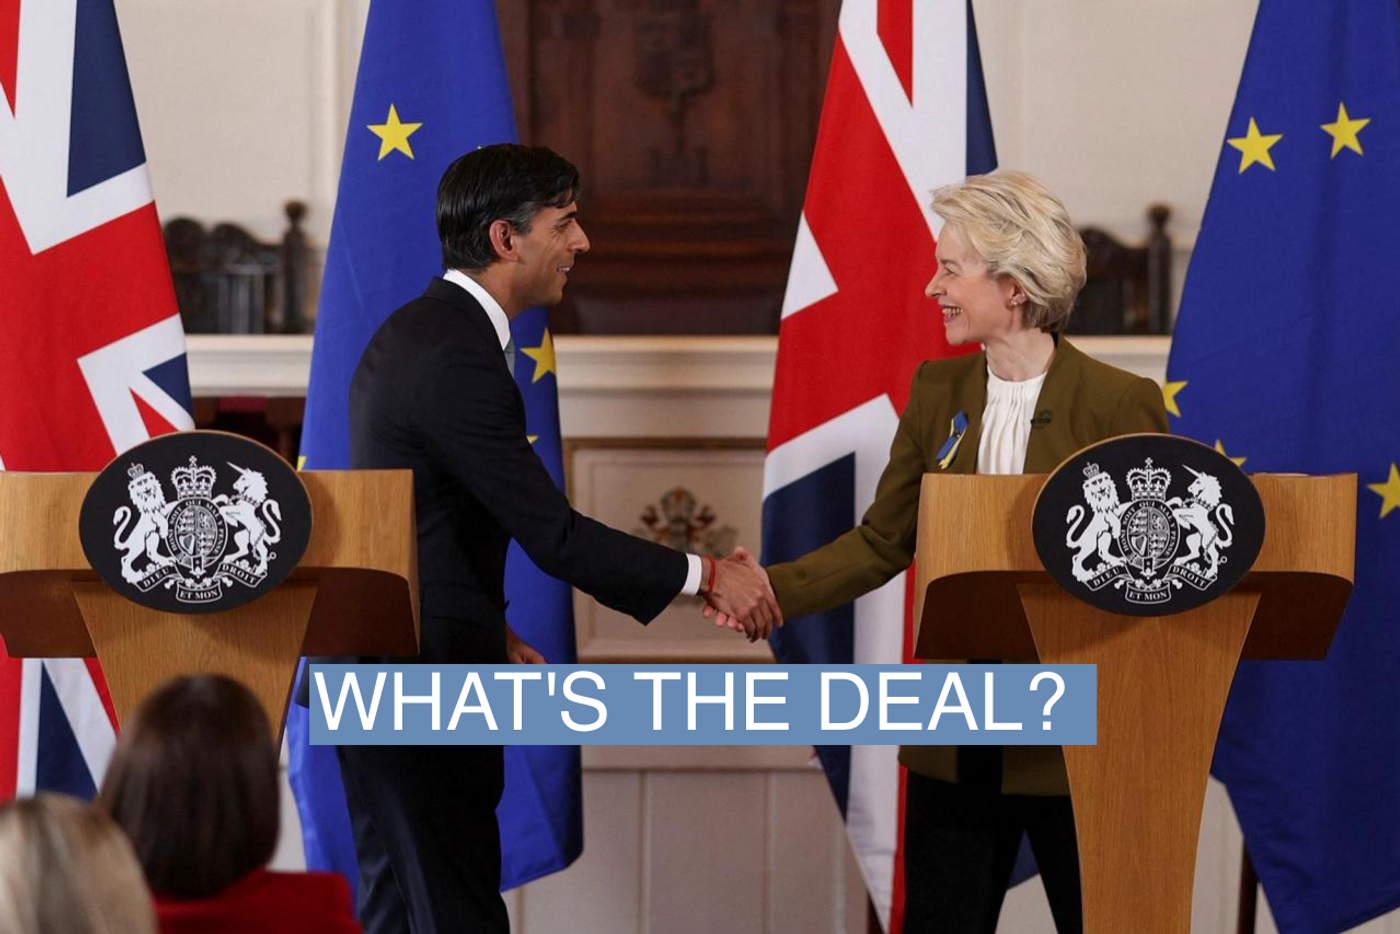 British Prime Minister Rishi Sunak and European Commission President Ursula von der Leyen shake hands as they hold a news conference at Windsor Guildhall, Britain, February 27, 2023. Dan Kitwood/Pool via REUTERS